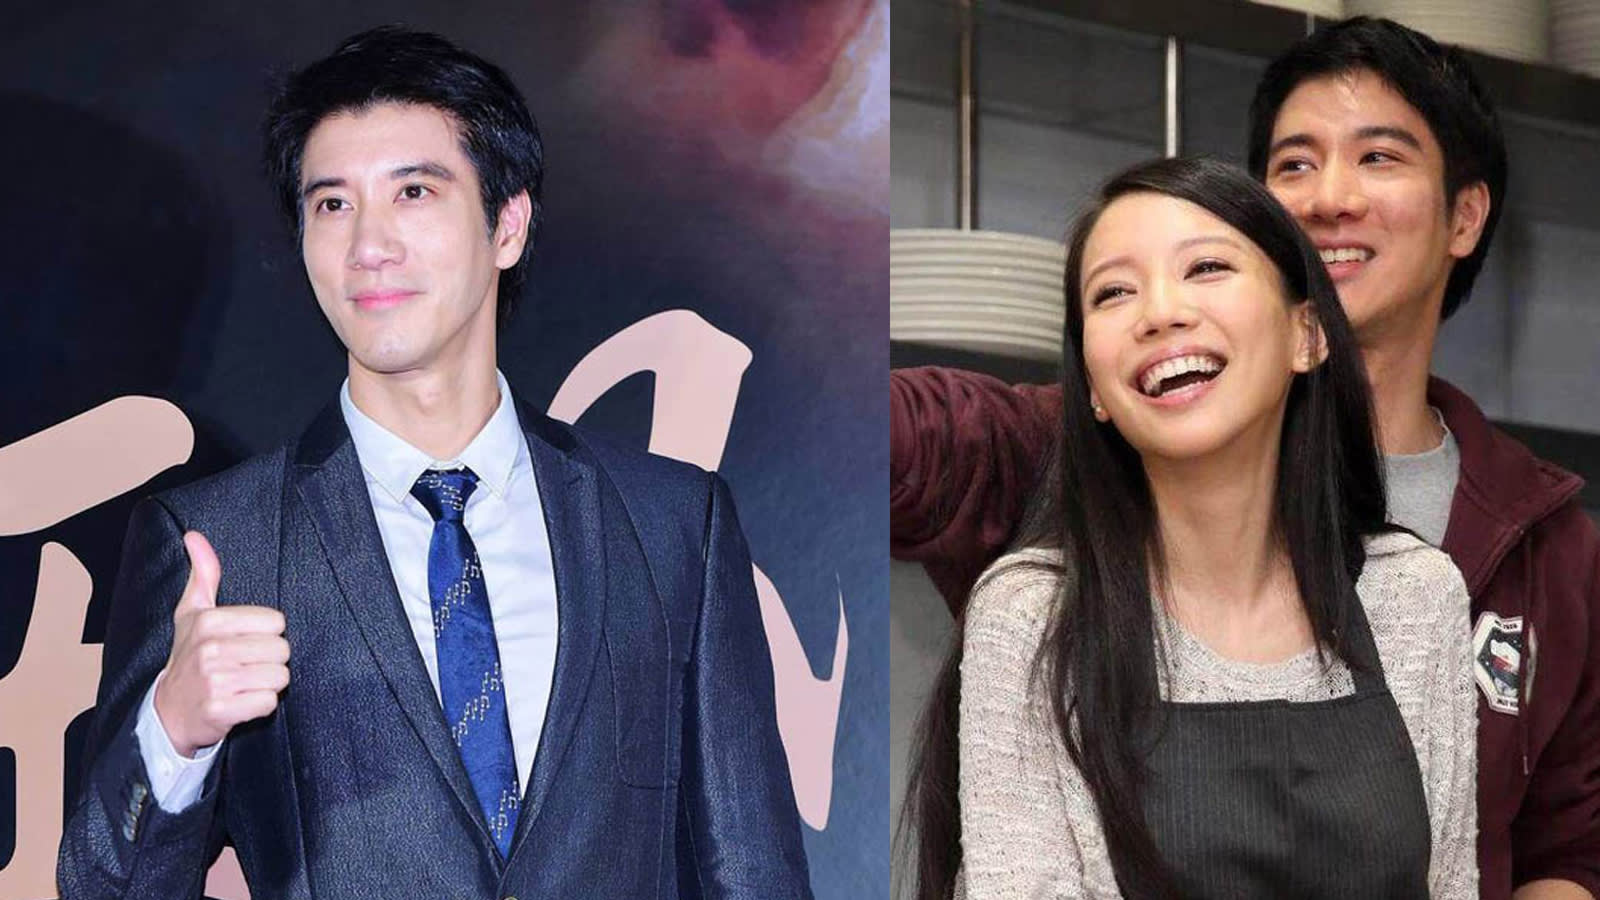 Wang Leehom Says He Will “Bear Full Responsibility” For The Divorce & “Take  A Break” From Work To Be With Family In Latest Post - 8days